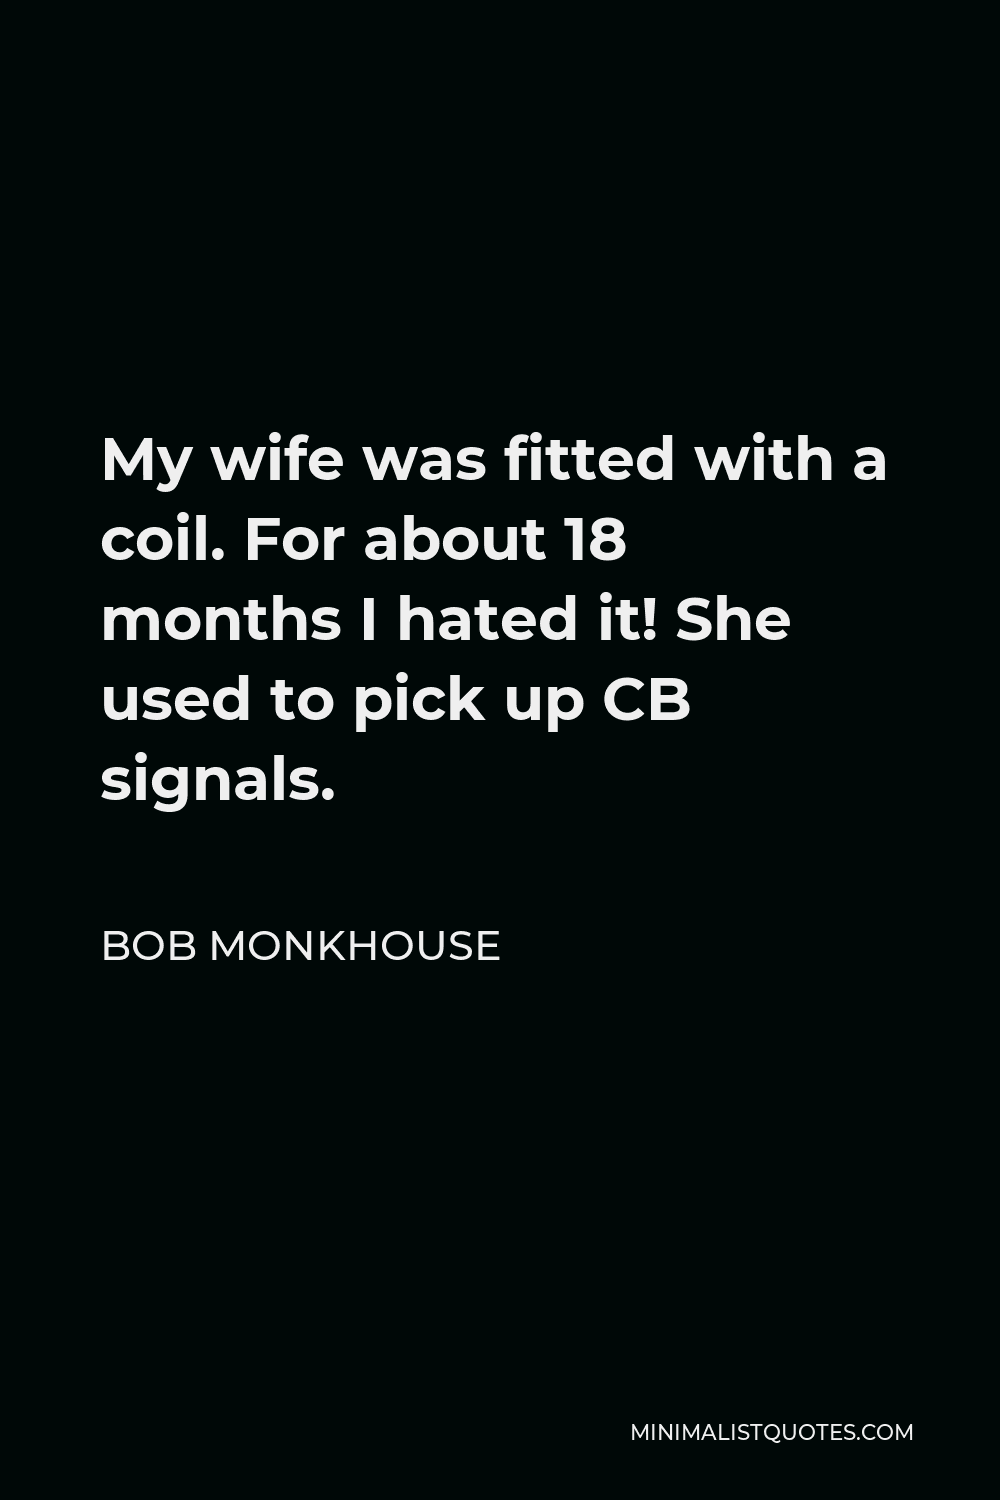 Bob Monkhouse Quote - My wife was fitted with a coil. For about 18 months I hated it! She used to pick up CB signals.